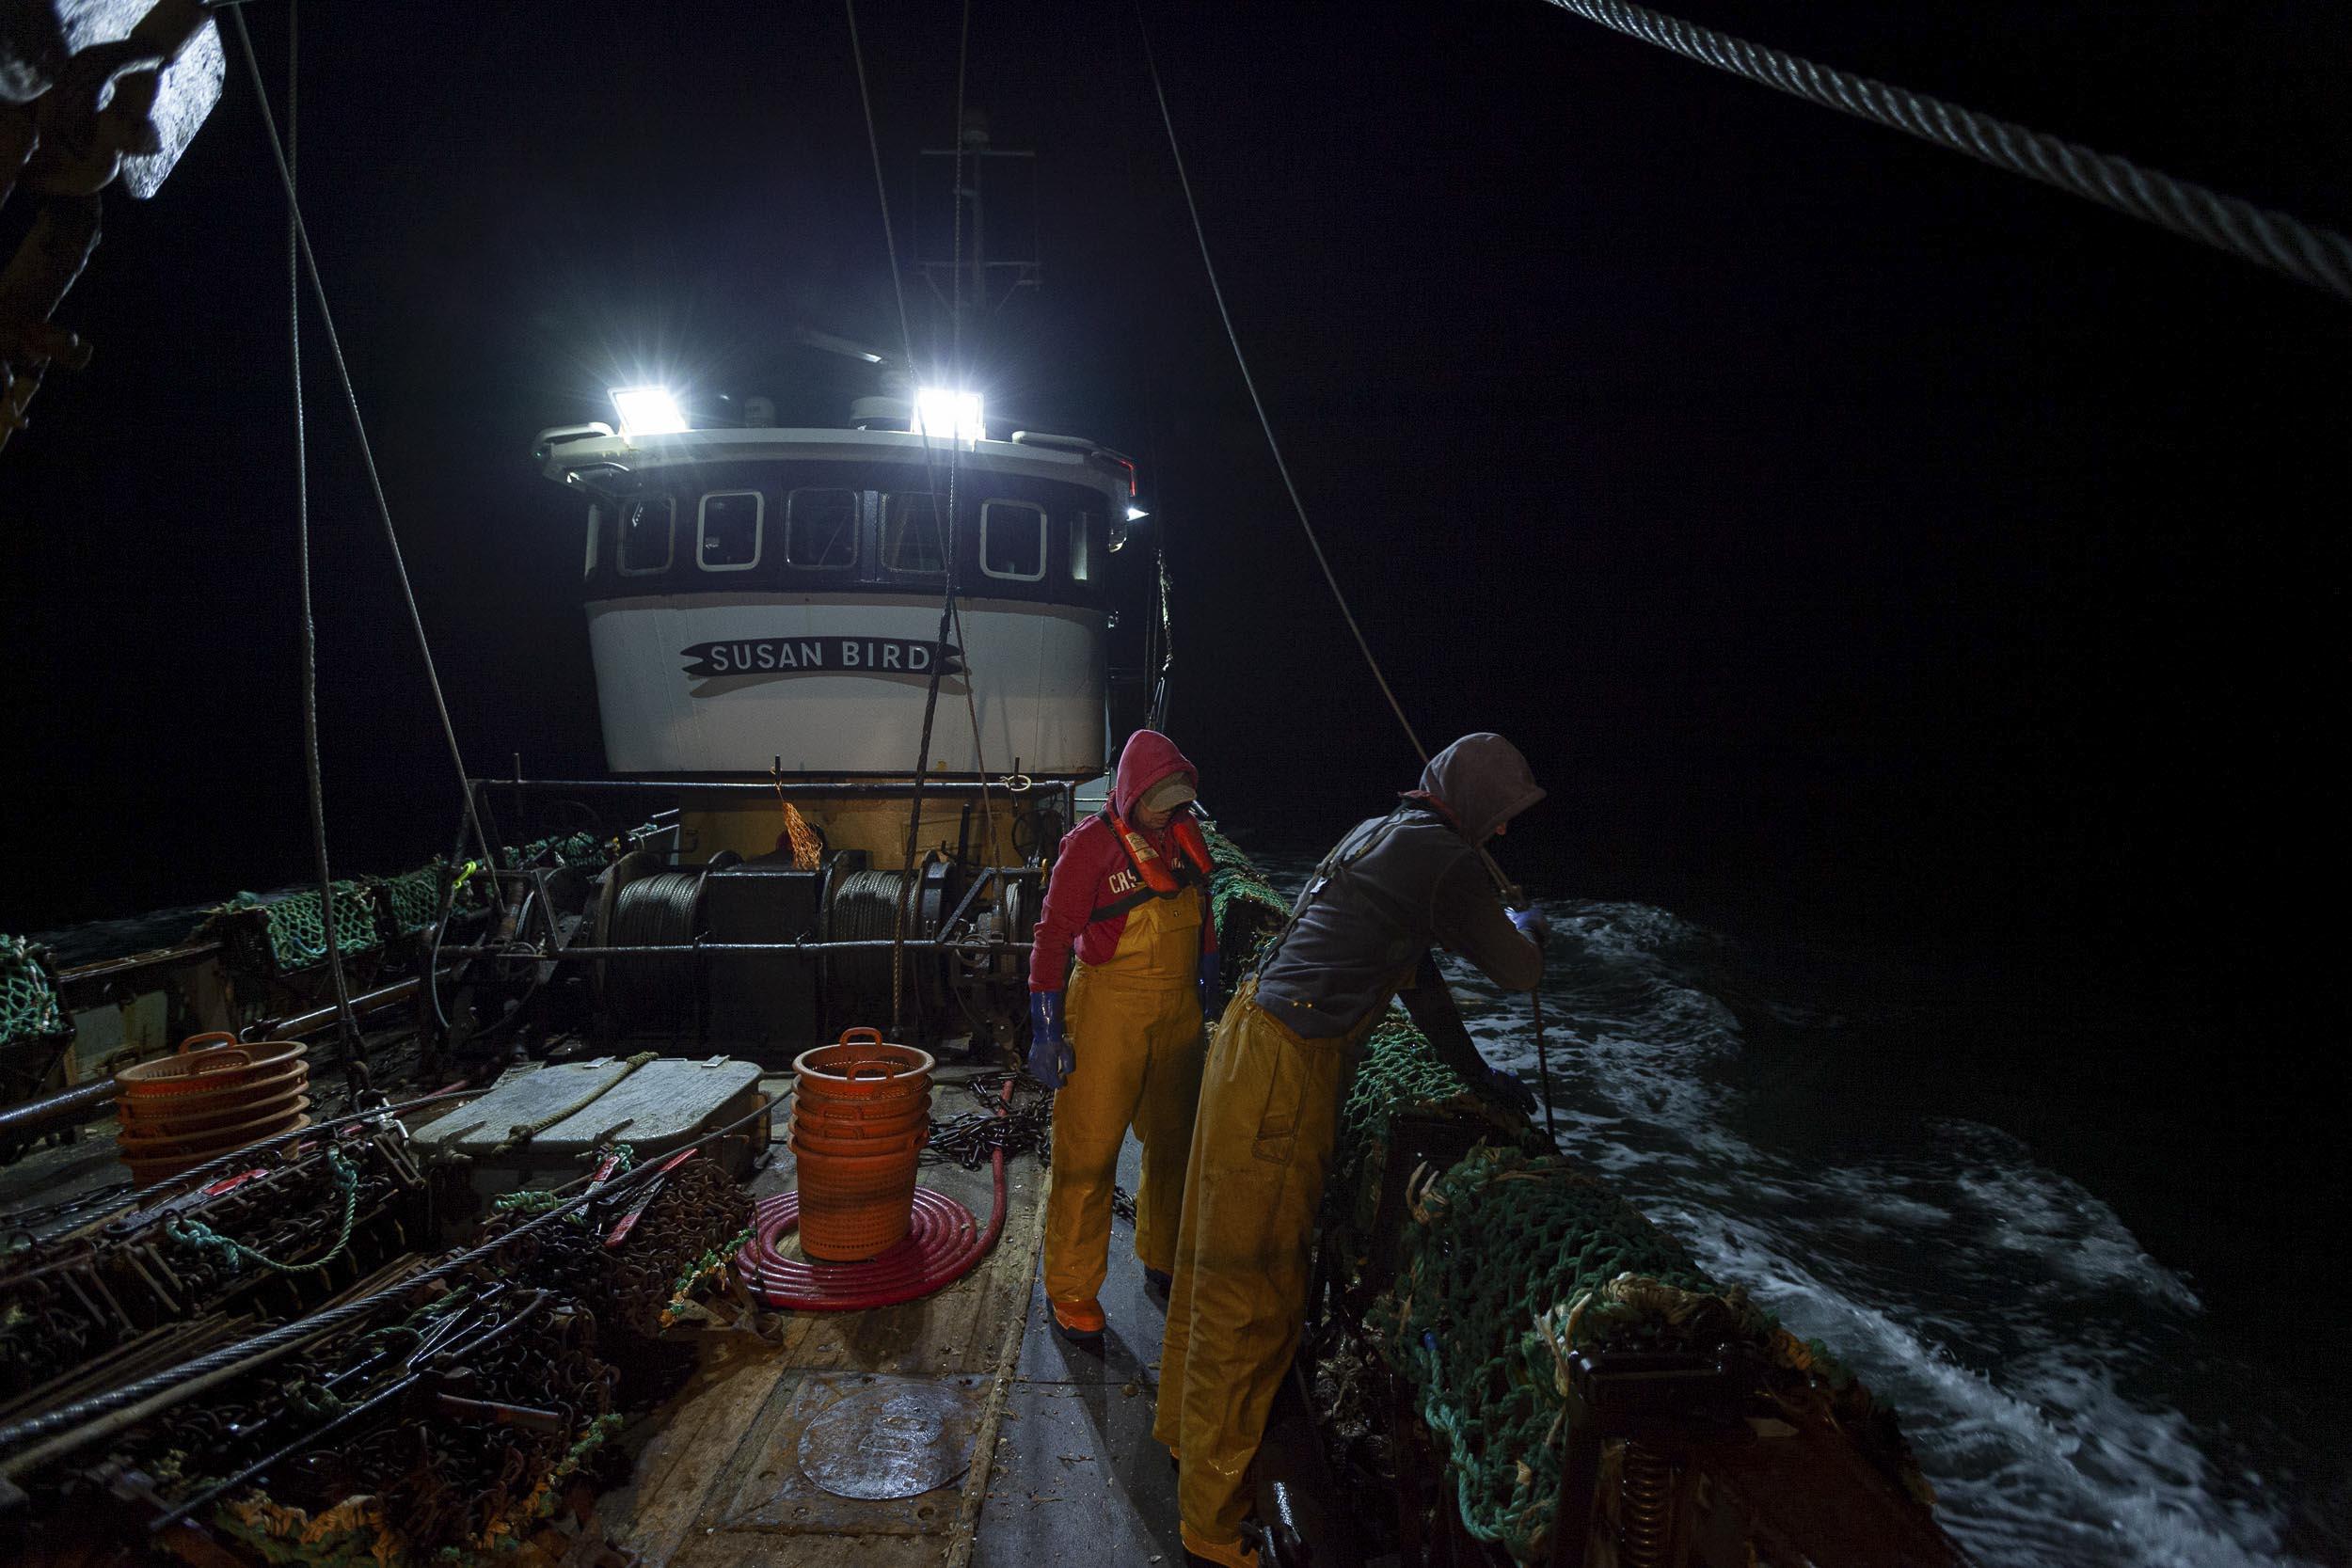 The Susan Bird fishing trawler on the sea at night. Two fishermen are looking over the side of the boat at the scallop dredger.